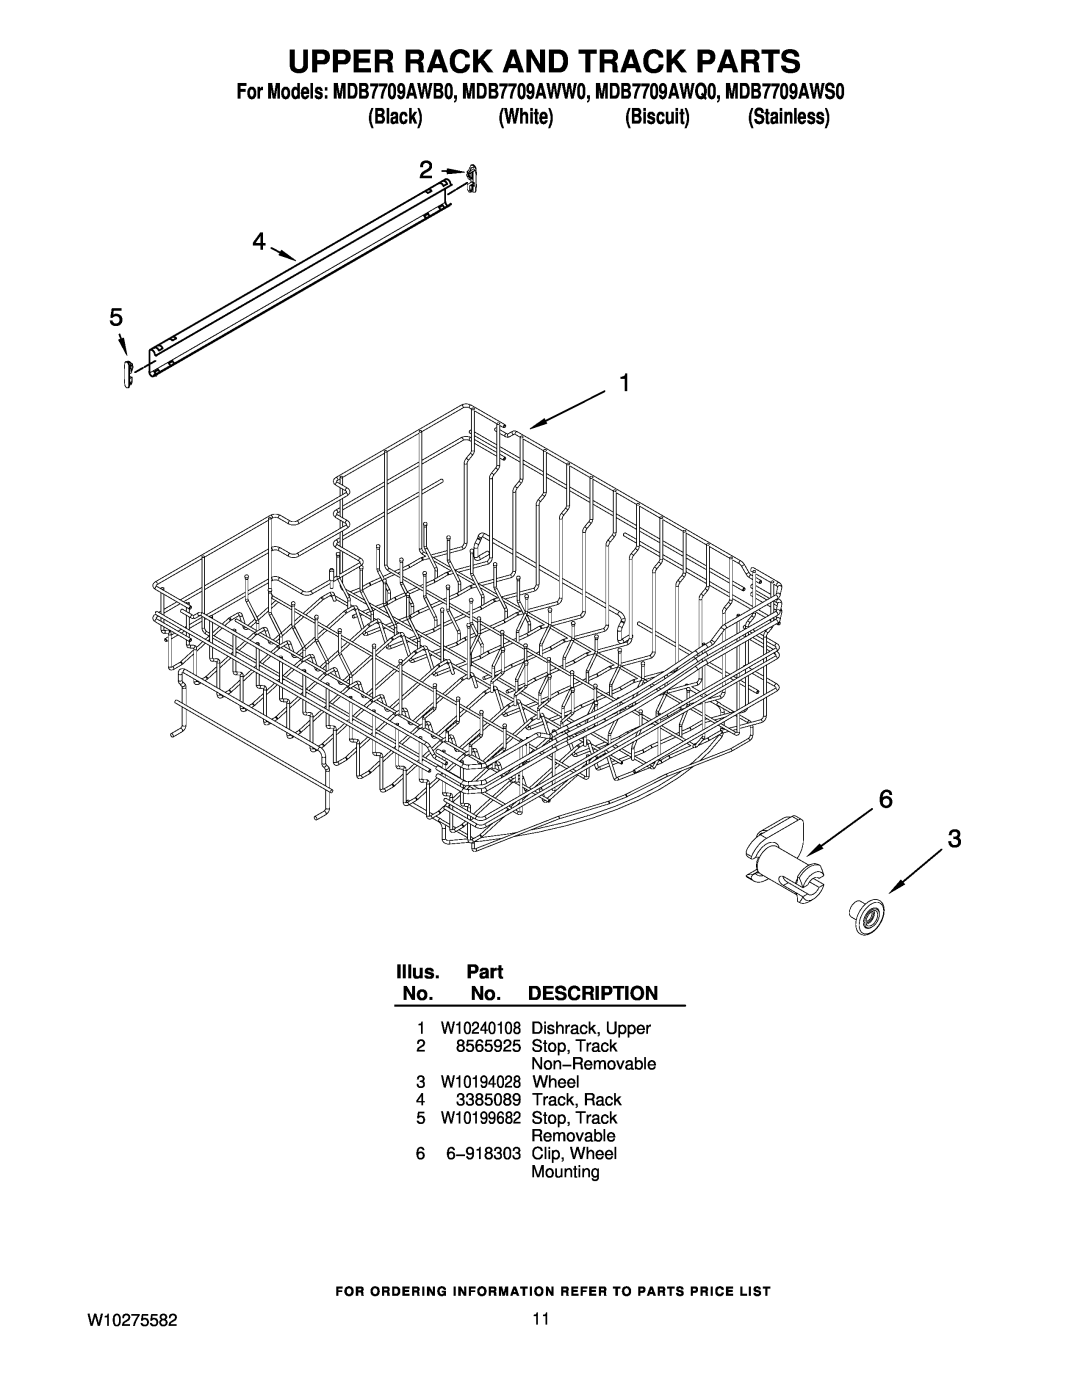 Maytag MDB7709AWS0 manual Upper Rack And Track Parts, Black, White, Biscuit, Illus. Part No. No. DESCRIPTION, Stainless 